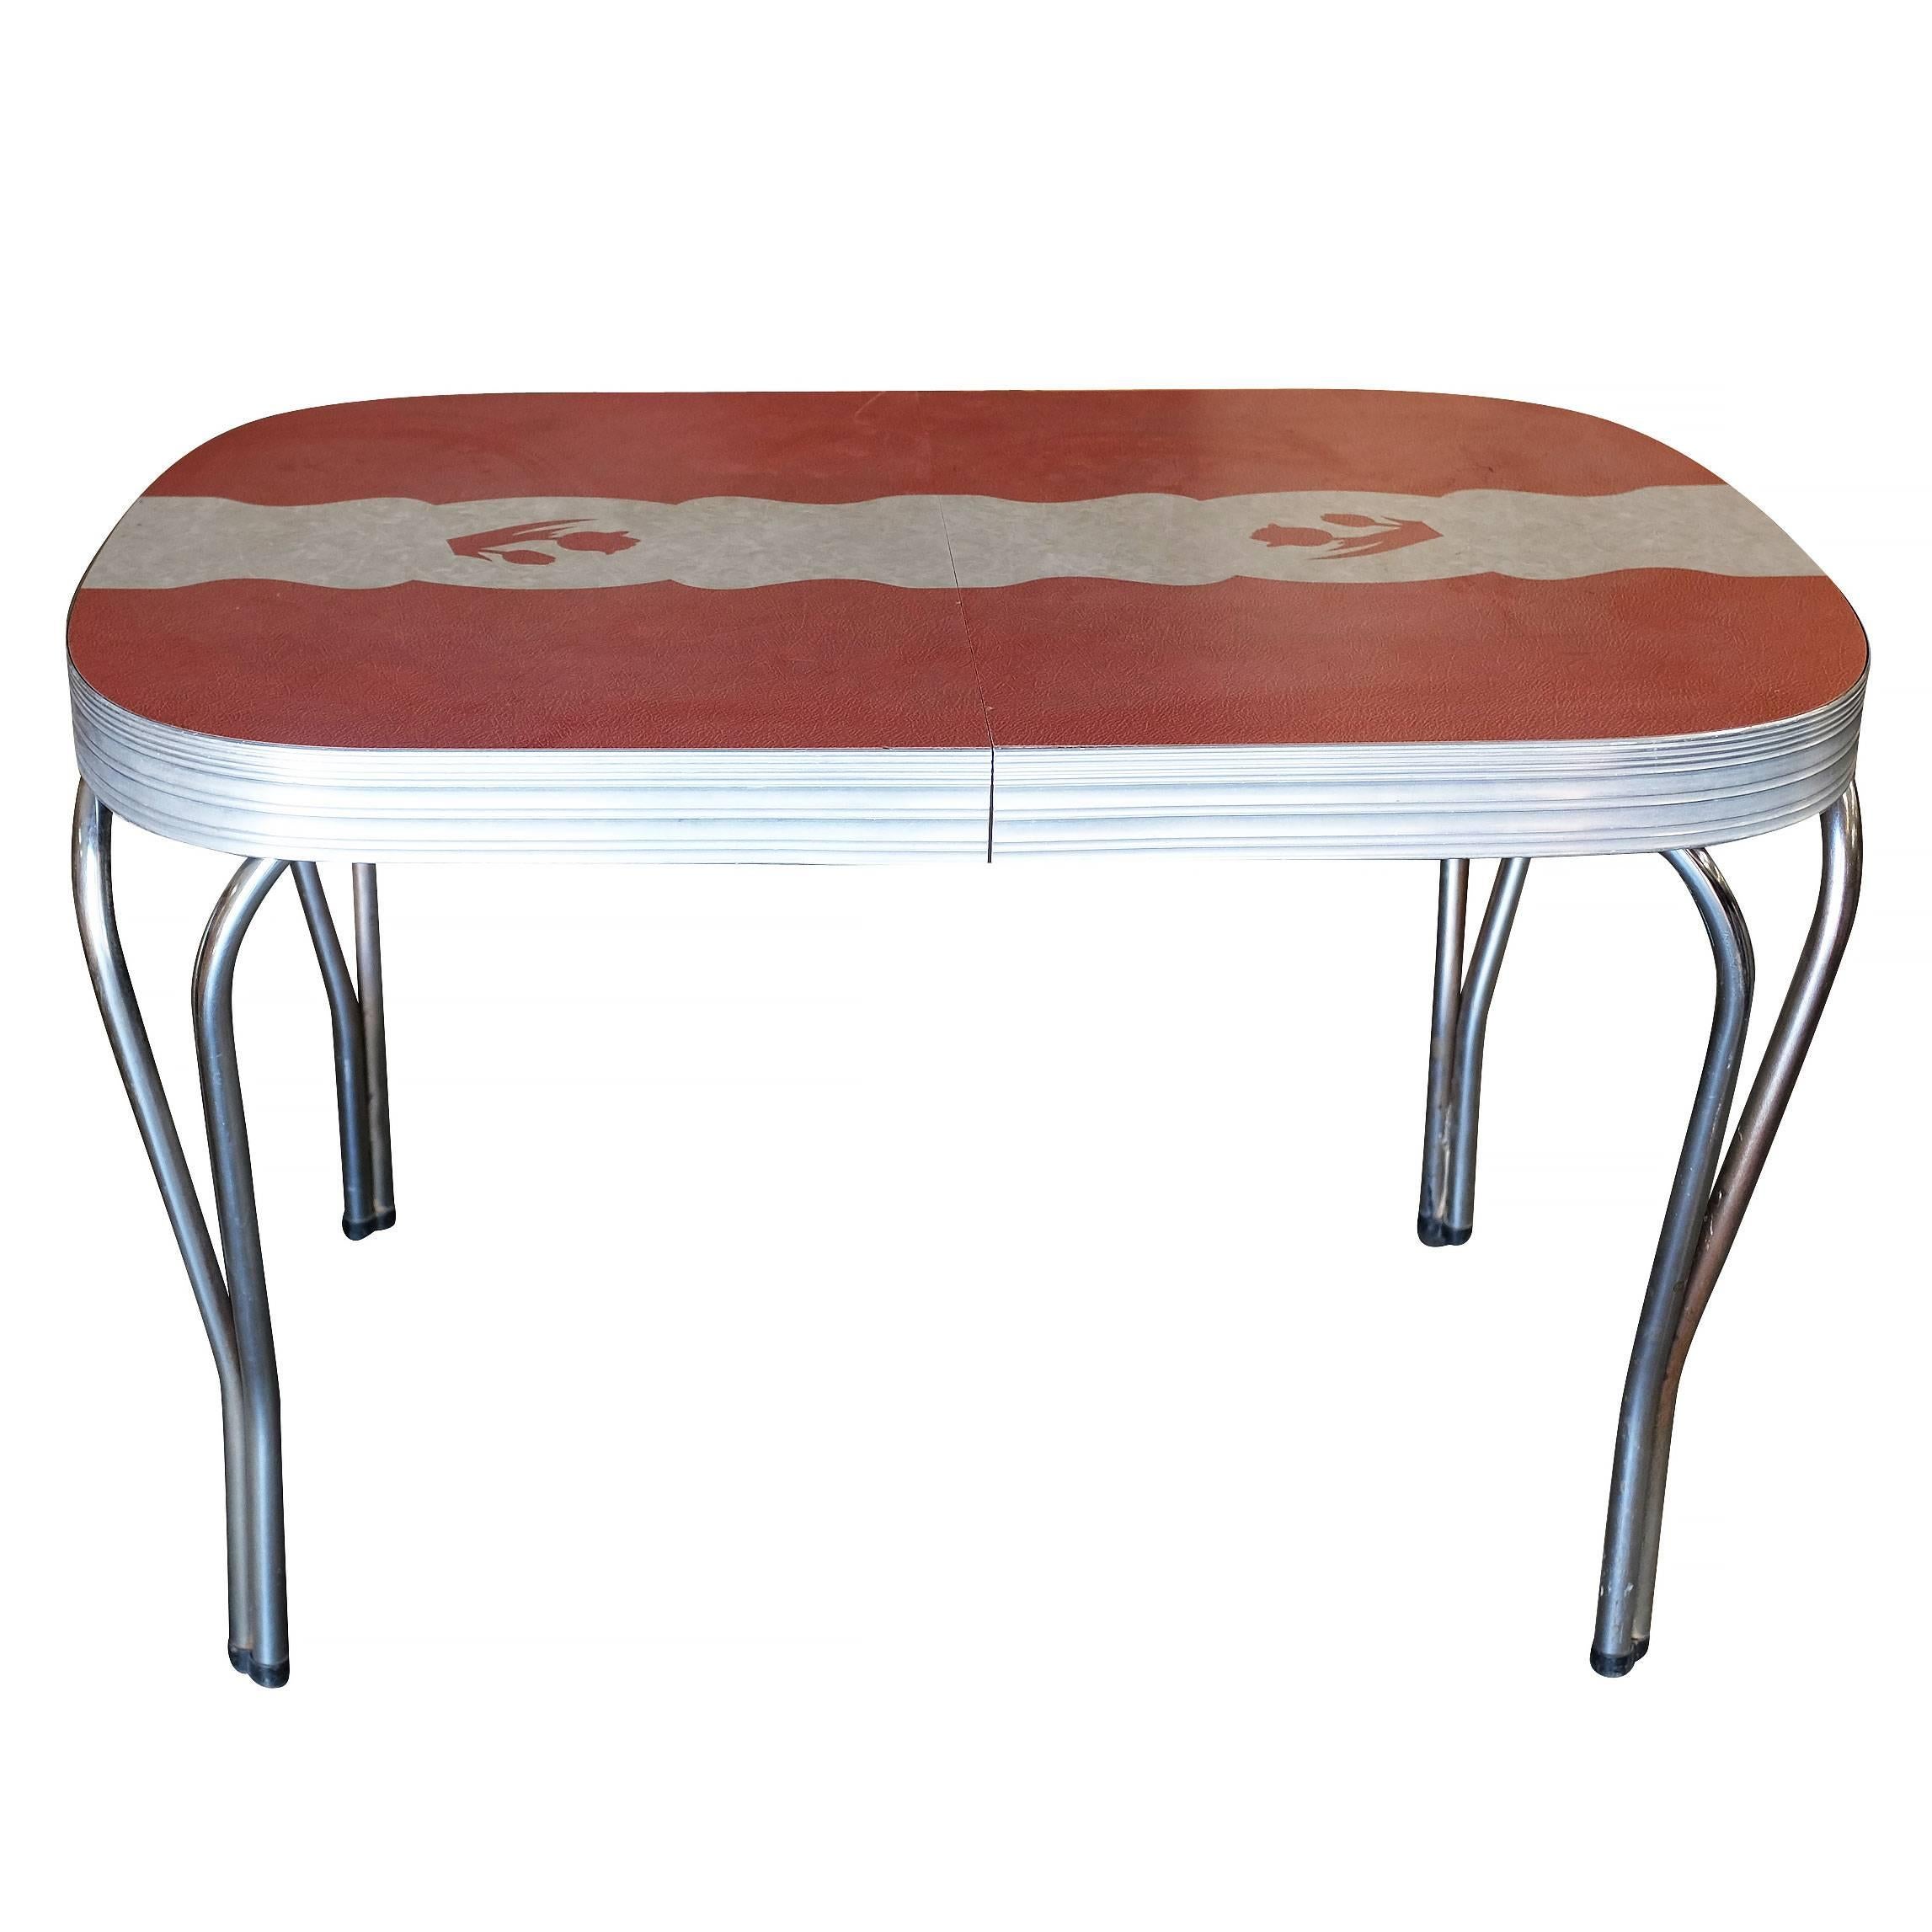 formica kitchen tables